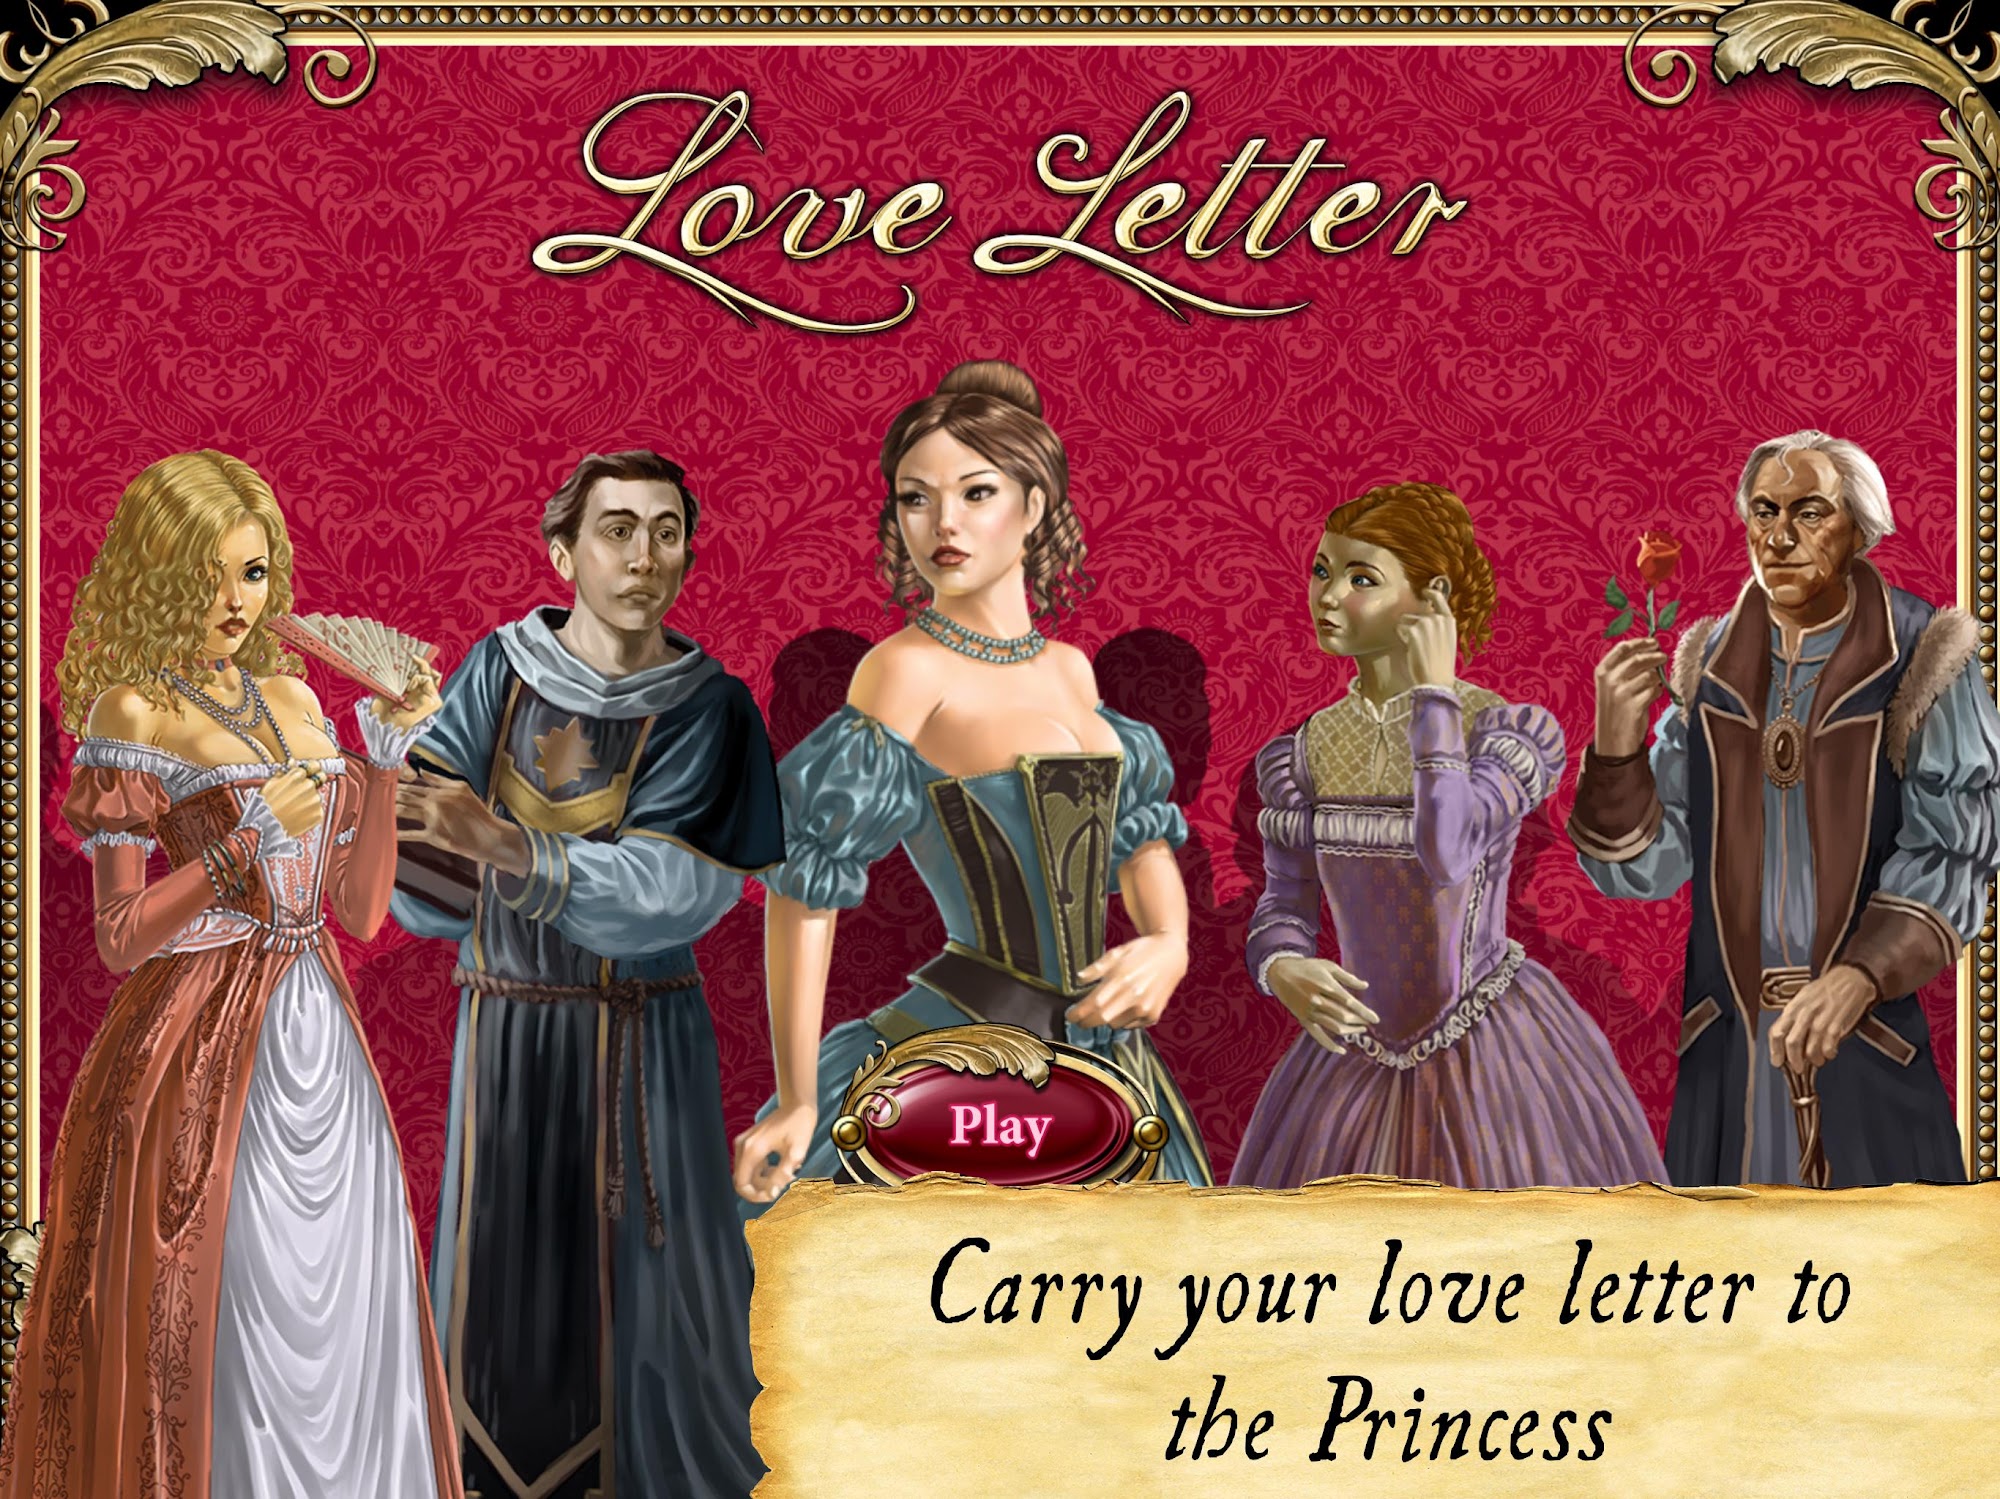 Baixar Love Letter - Strategy Card Game para Android grátis.